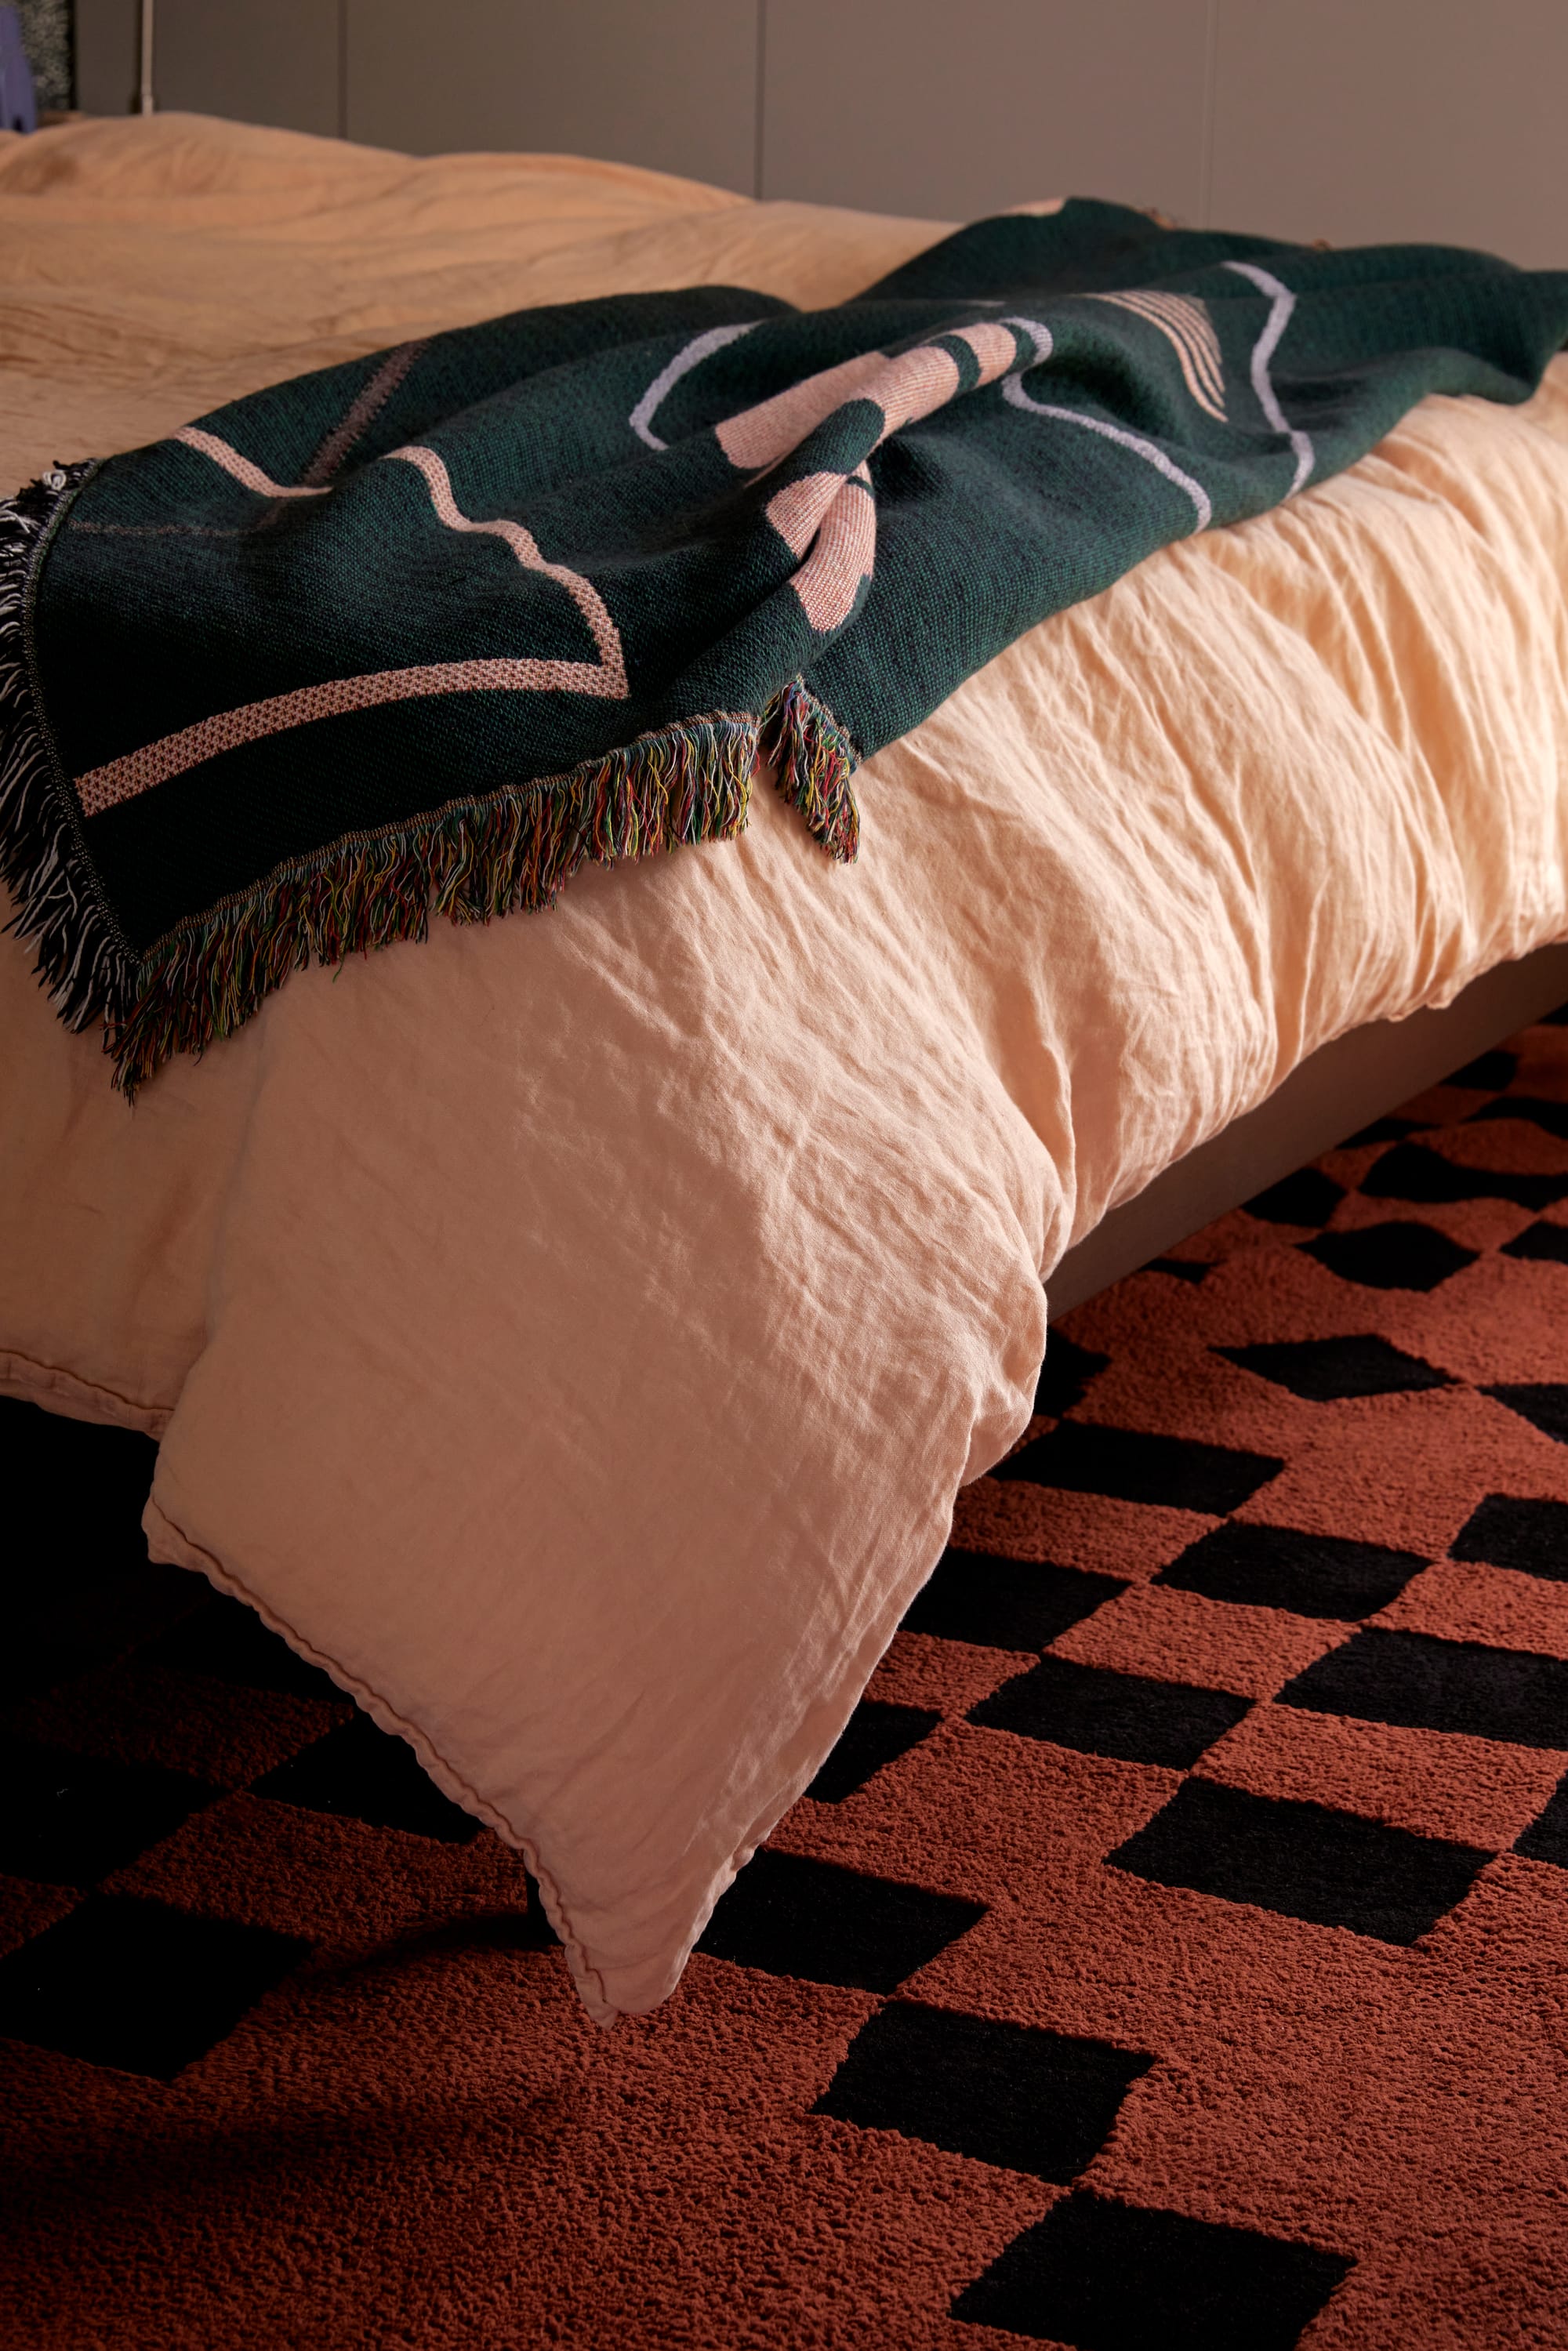 Checking Brown Cotton Feel Rug by Double. Photographer: Jacqui Turkc. Terracotta and black checkered rug. Peach linen bed cover with bottle green throw rug on end of bed. 